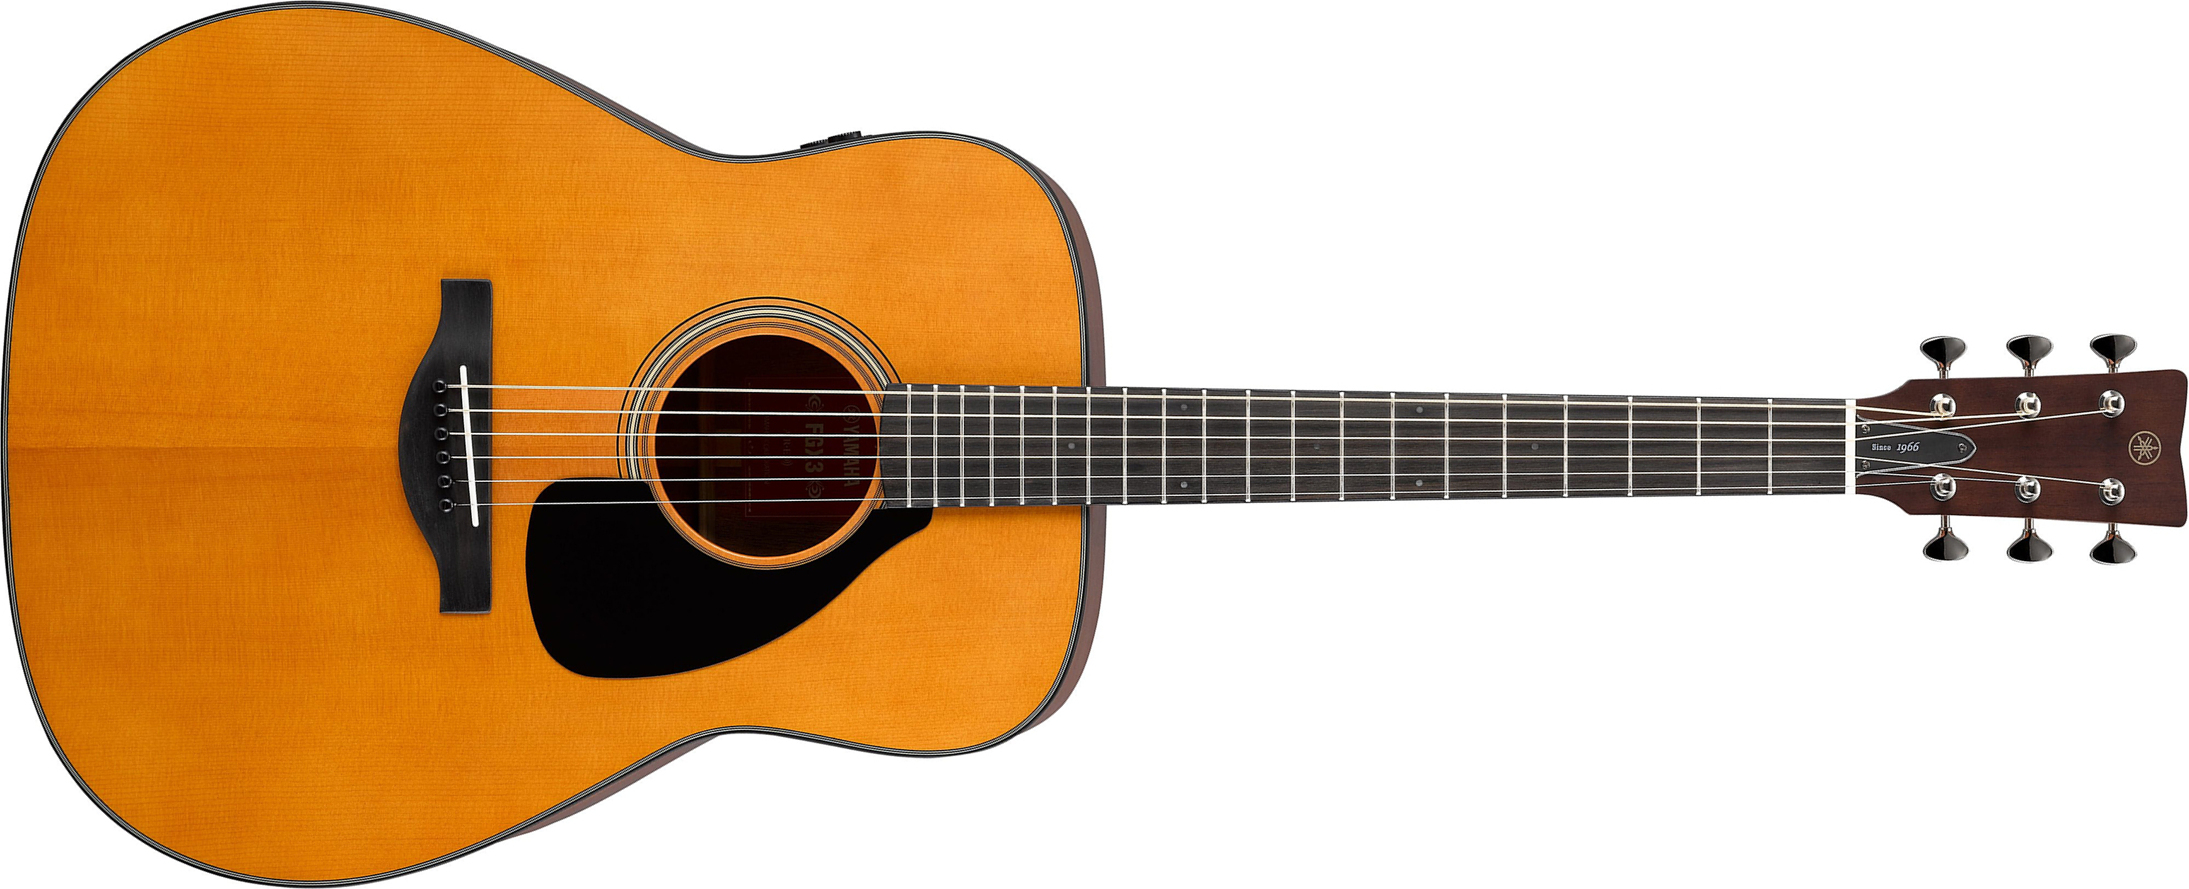 Yamaha Fgx3 Red Label Dreadnought Epicea Palissandre Eb - Heritage Natural - Westerngitarre & electro - Main picture